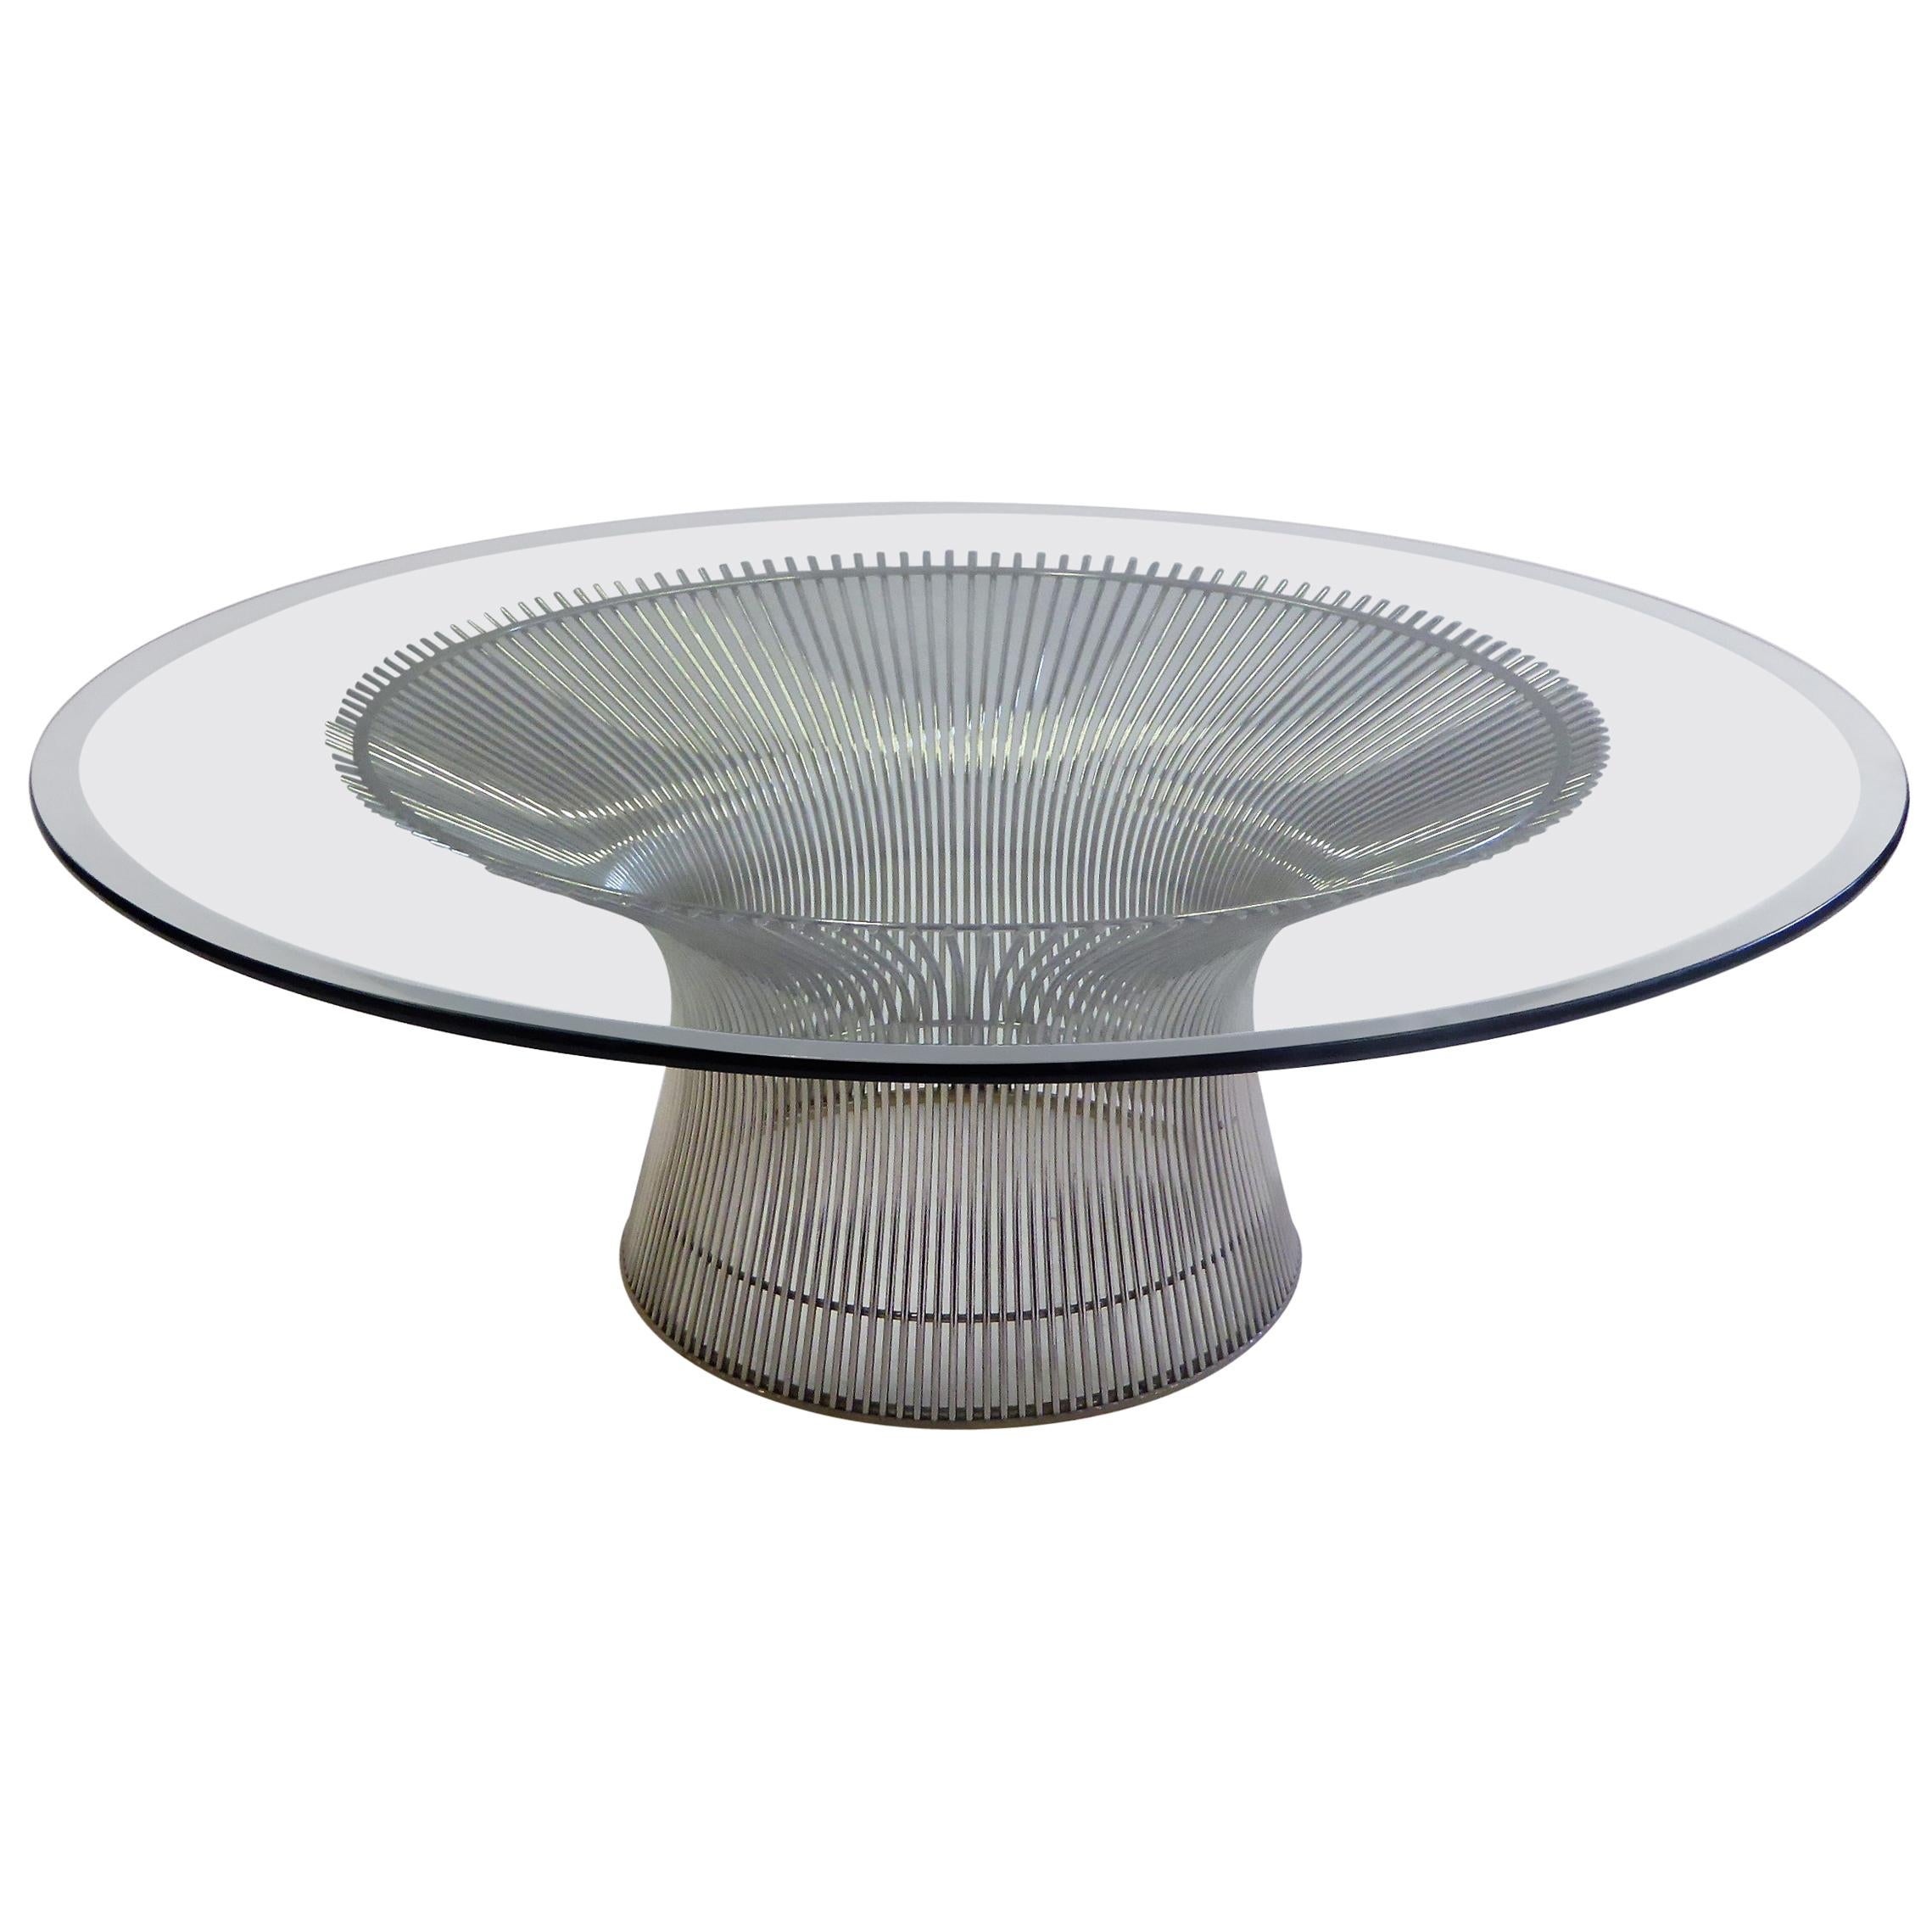 Iconic Warren Platner Coffee Table for Knoll